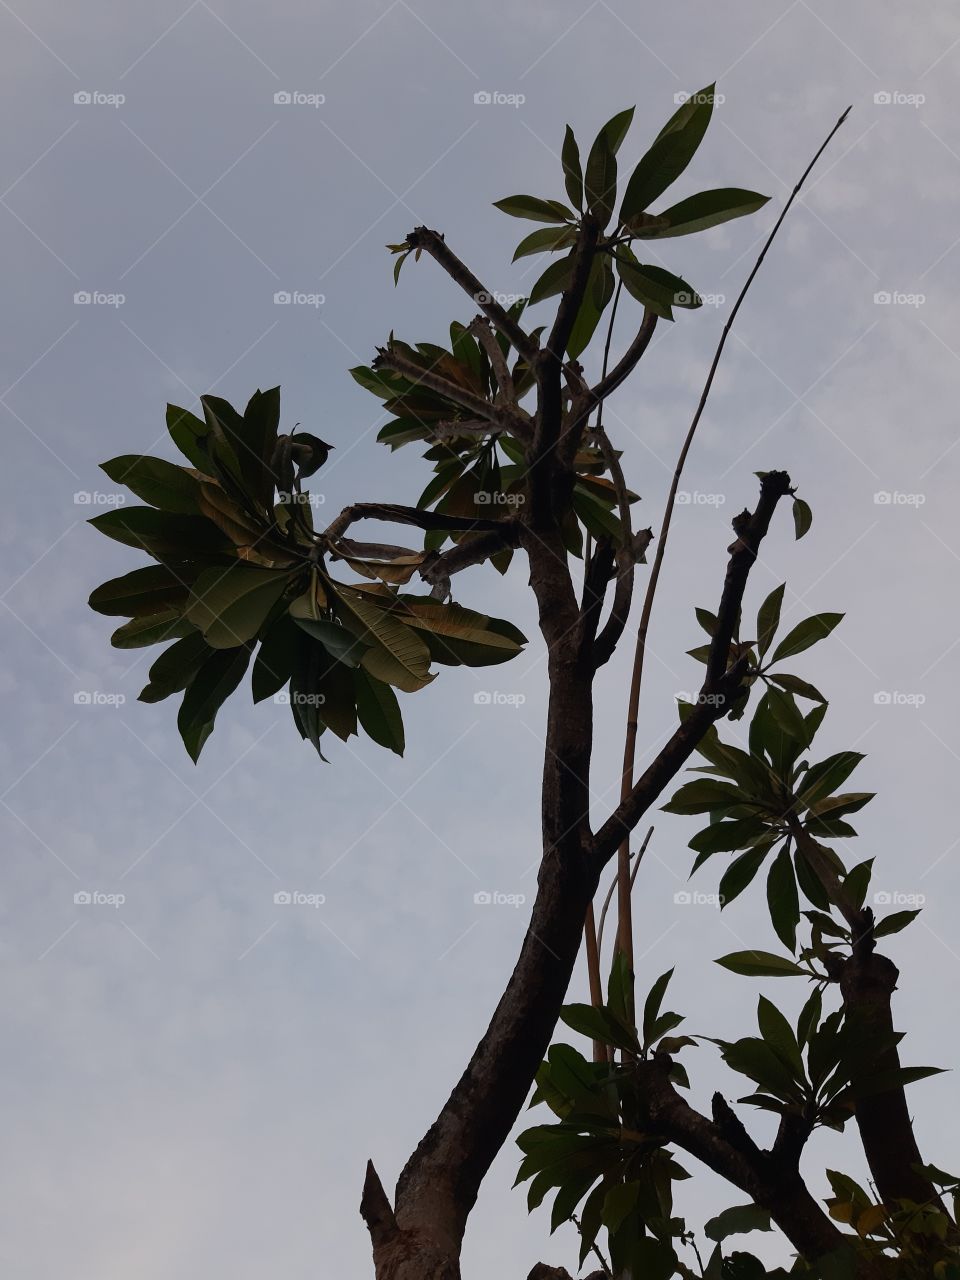 A frangipani tree under the sky and the long bamboo that used as a pole